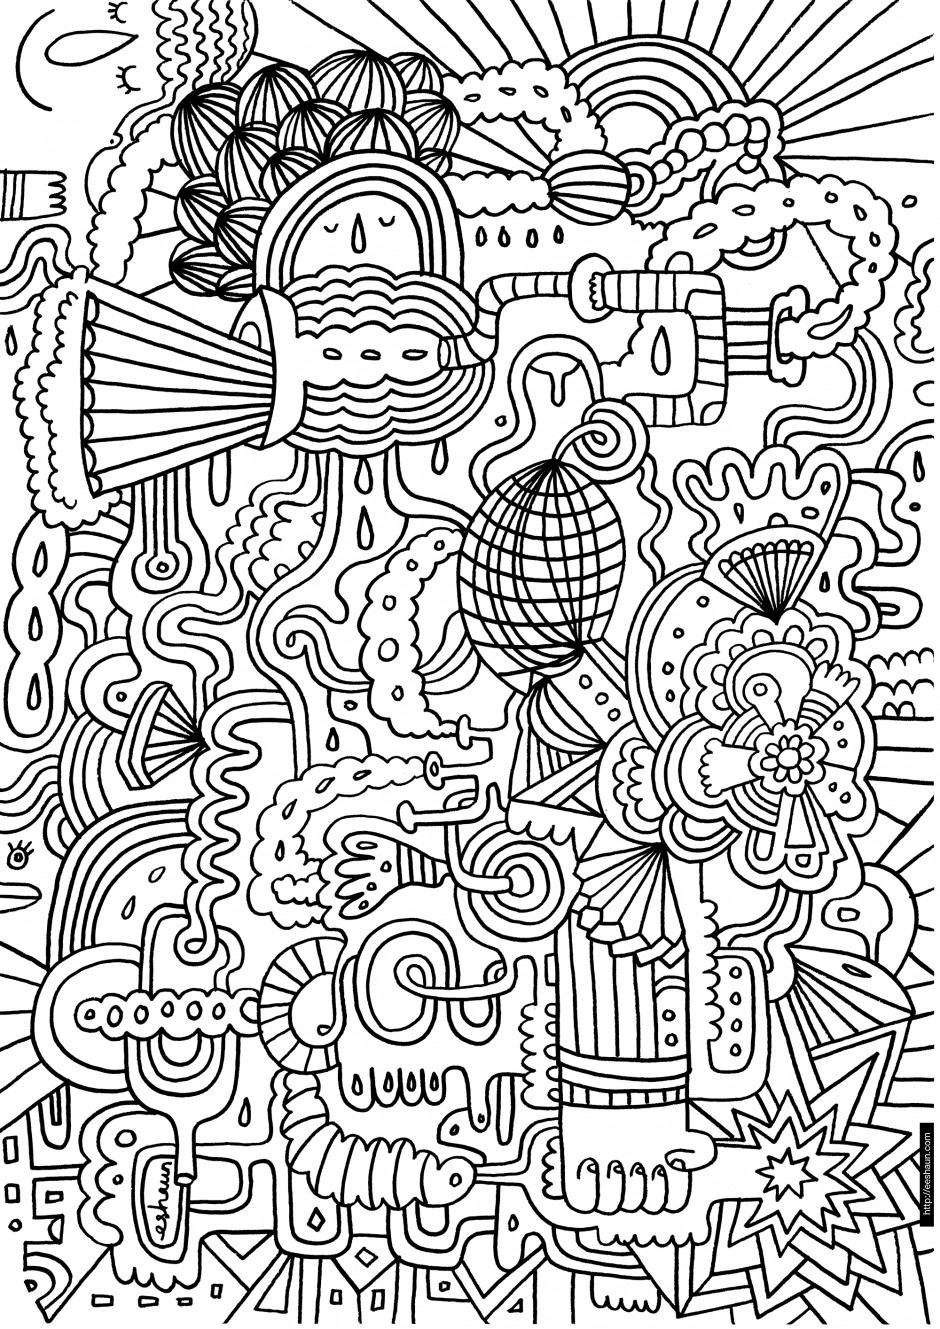 Cool Coloring Pages For Teenage Girls
 Coloring Pages for Teen Girls Best Cool Funny